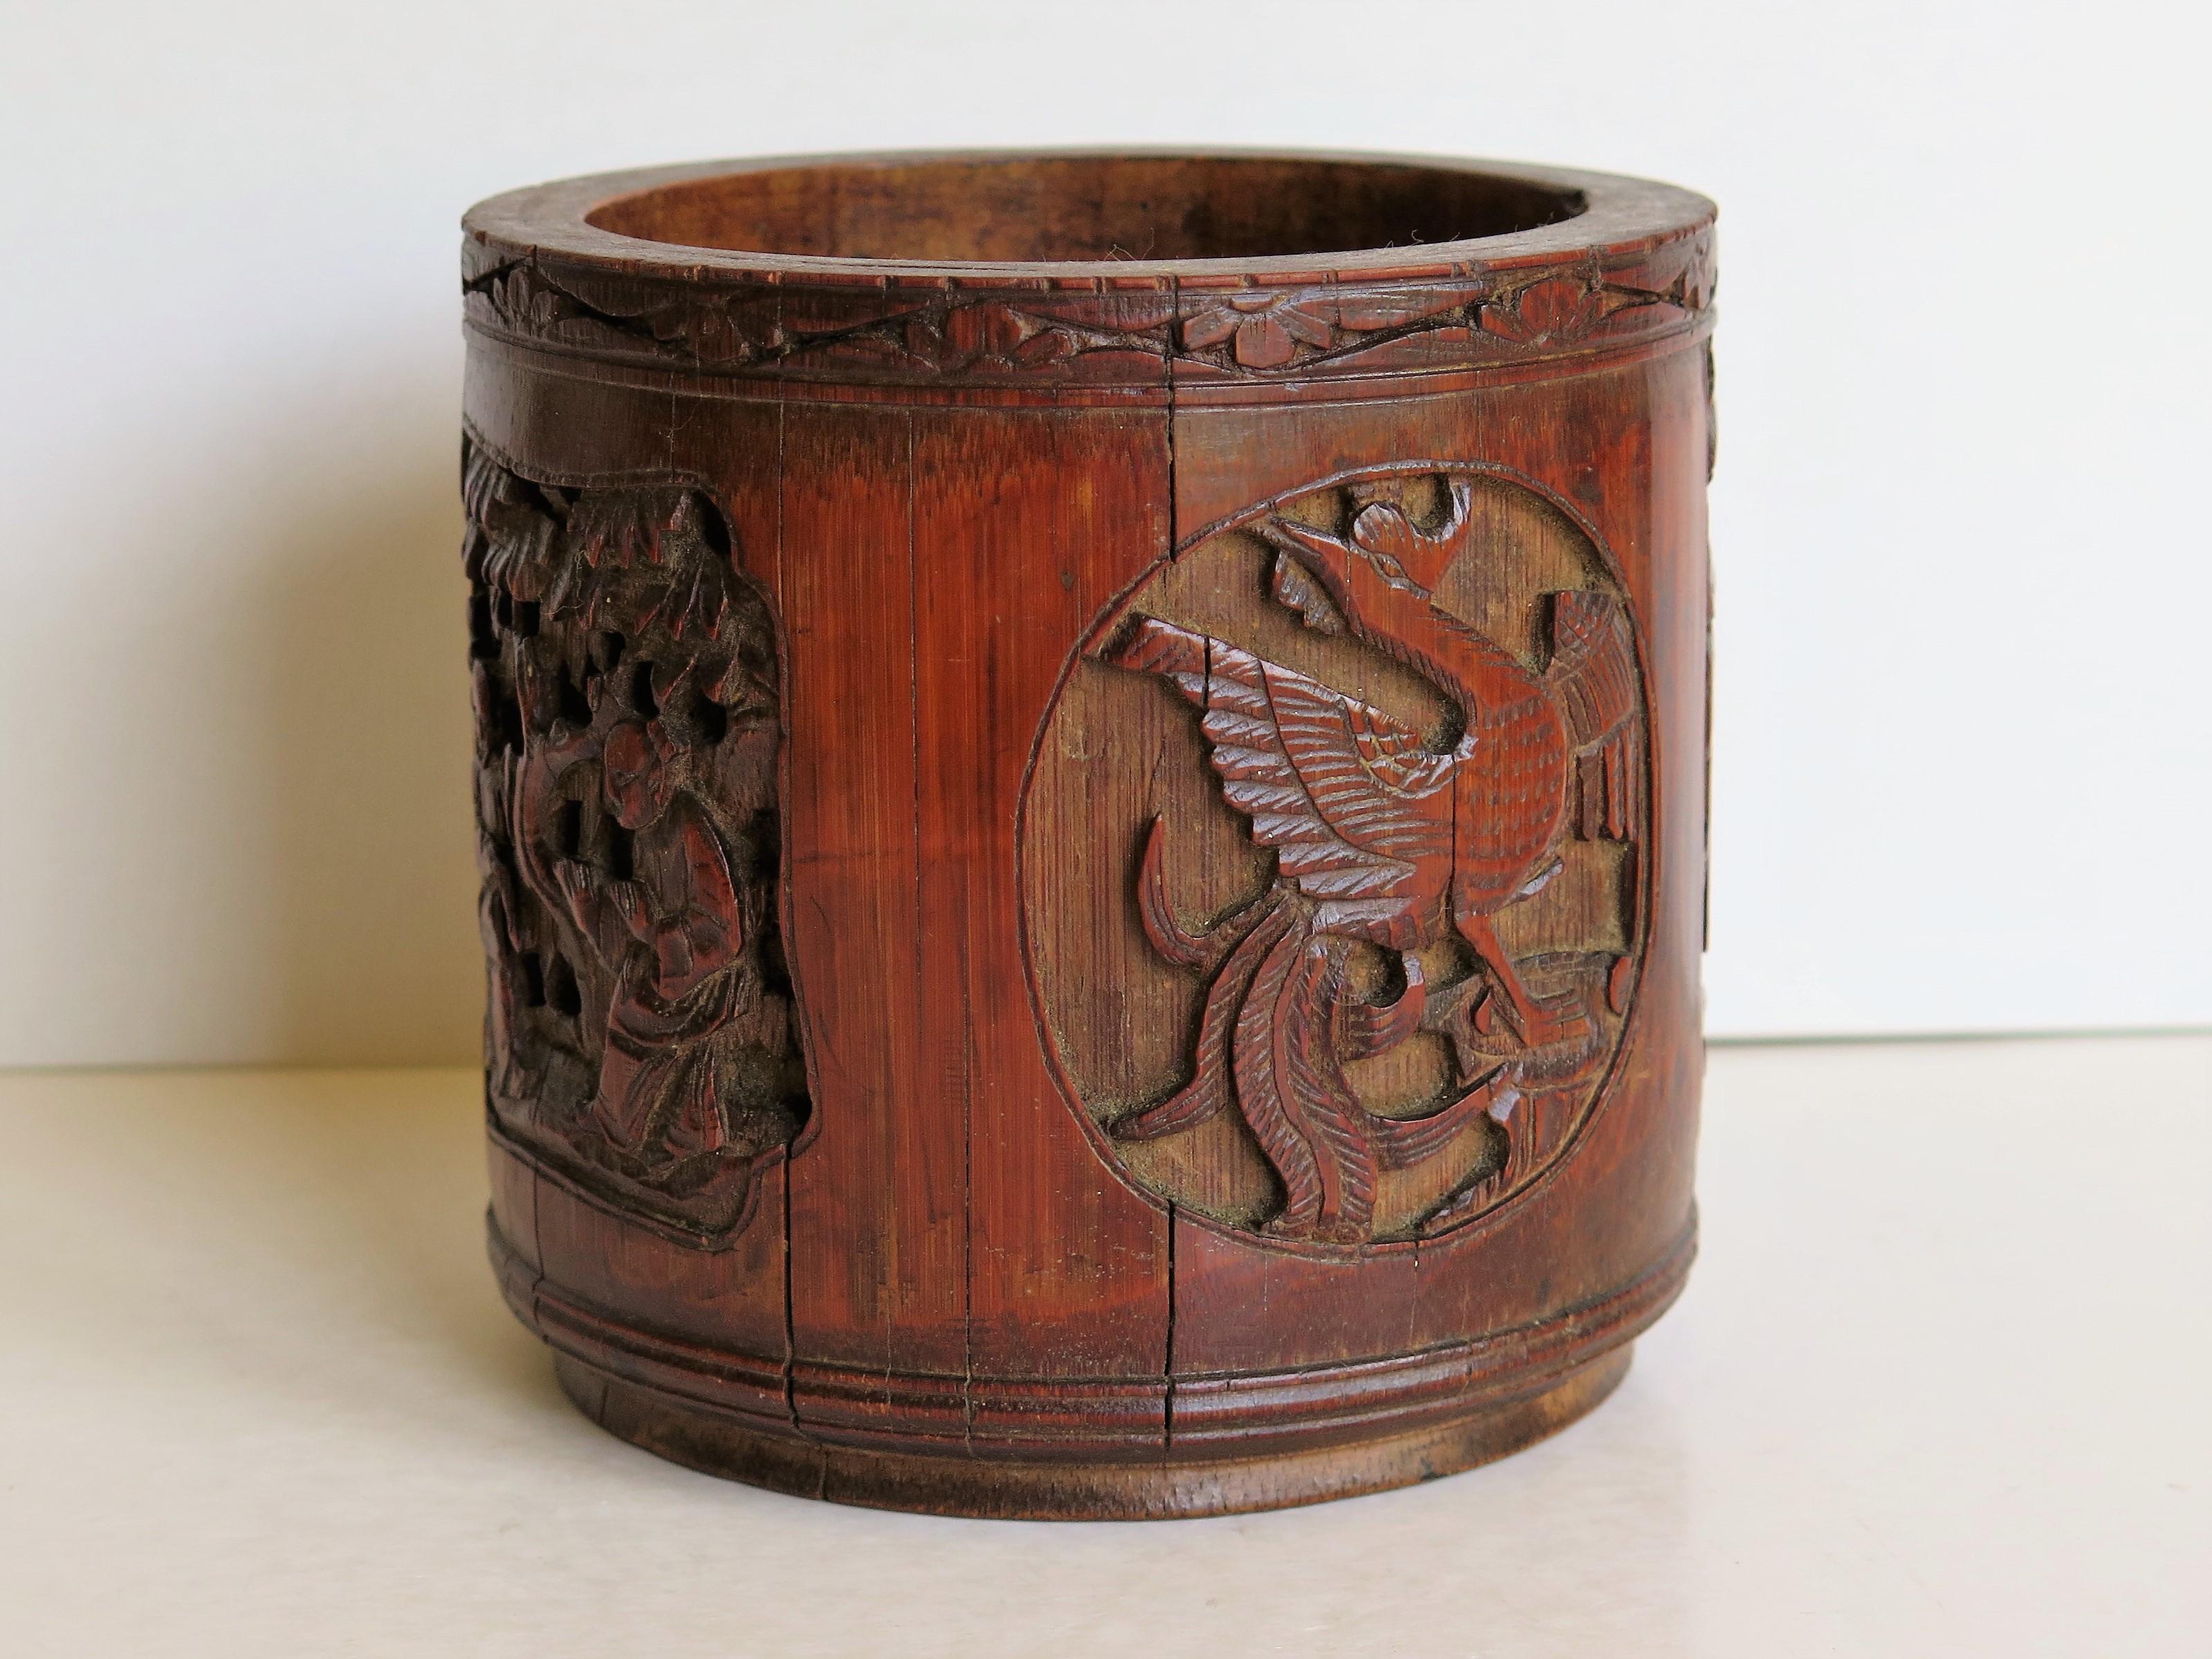 19th Century Chinese Brush Pot or Bitong in Bamboo Finely Carved & Signed, Early 19thC. Qing